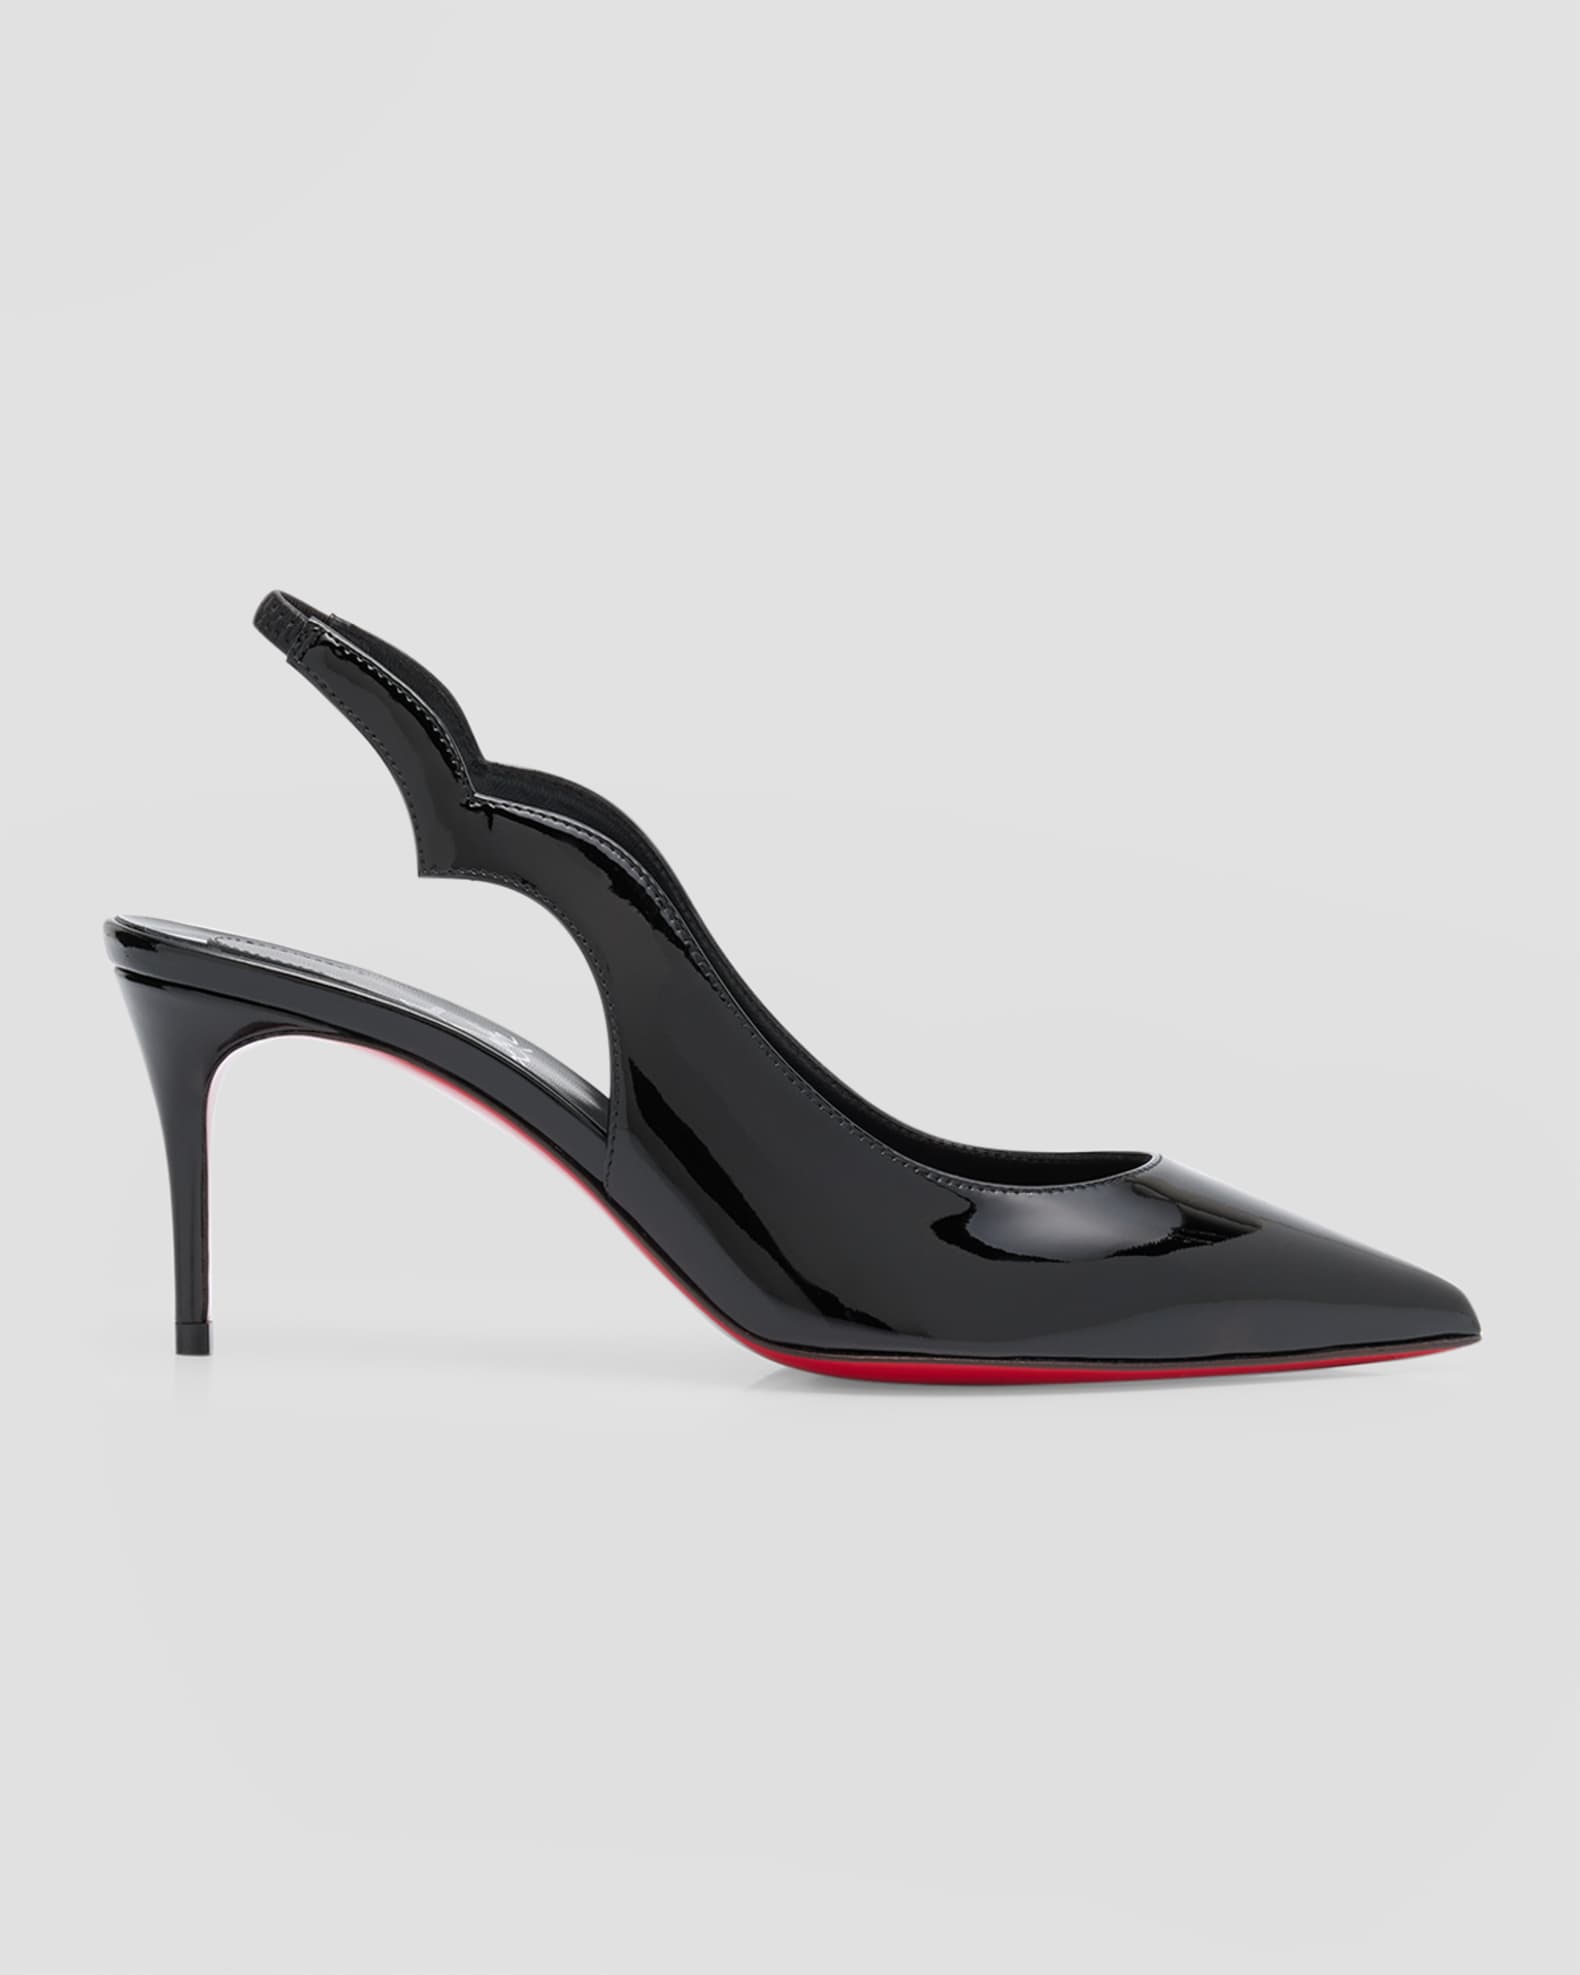 Christian Louboutin Hot Chick Patent Red Sole Slingback Pumps | Neiman ...